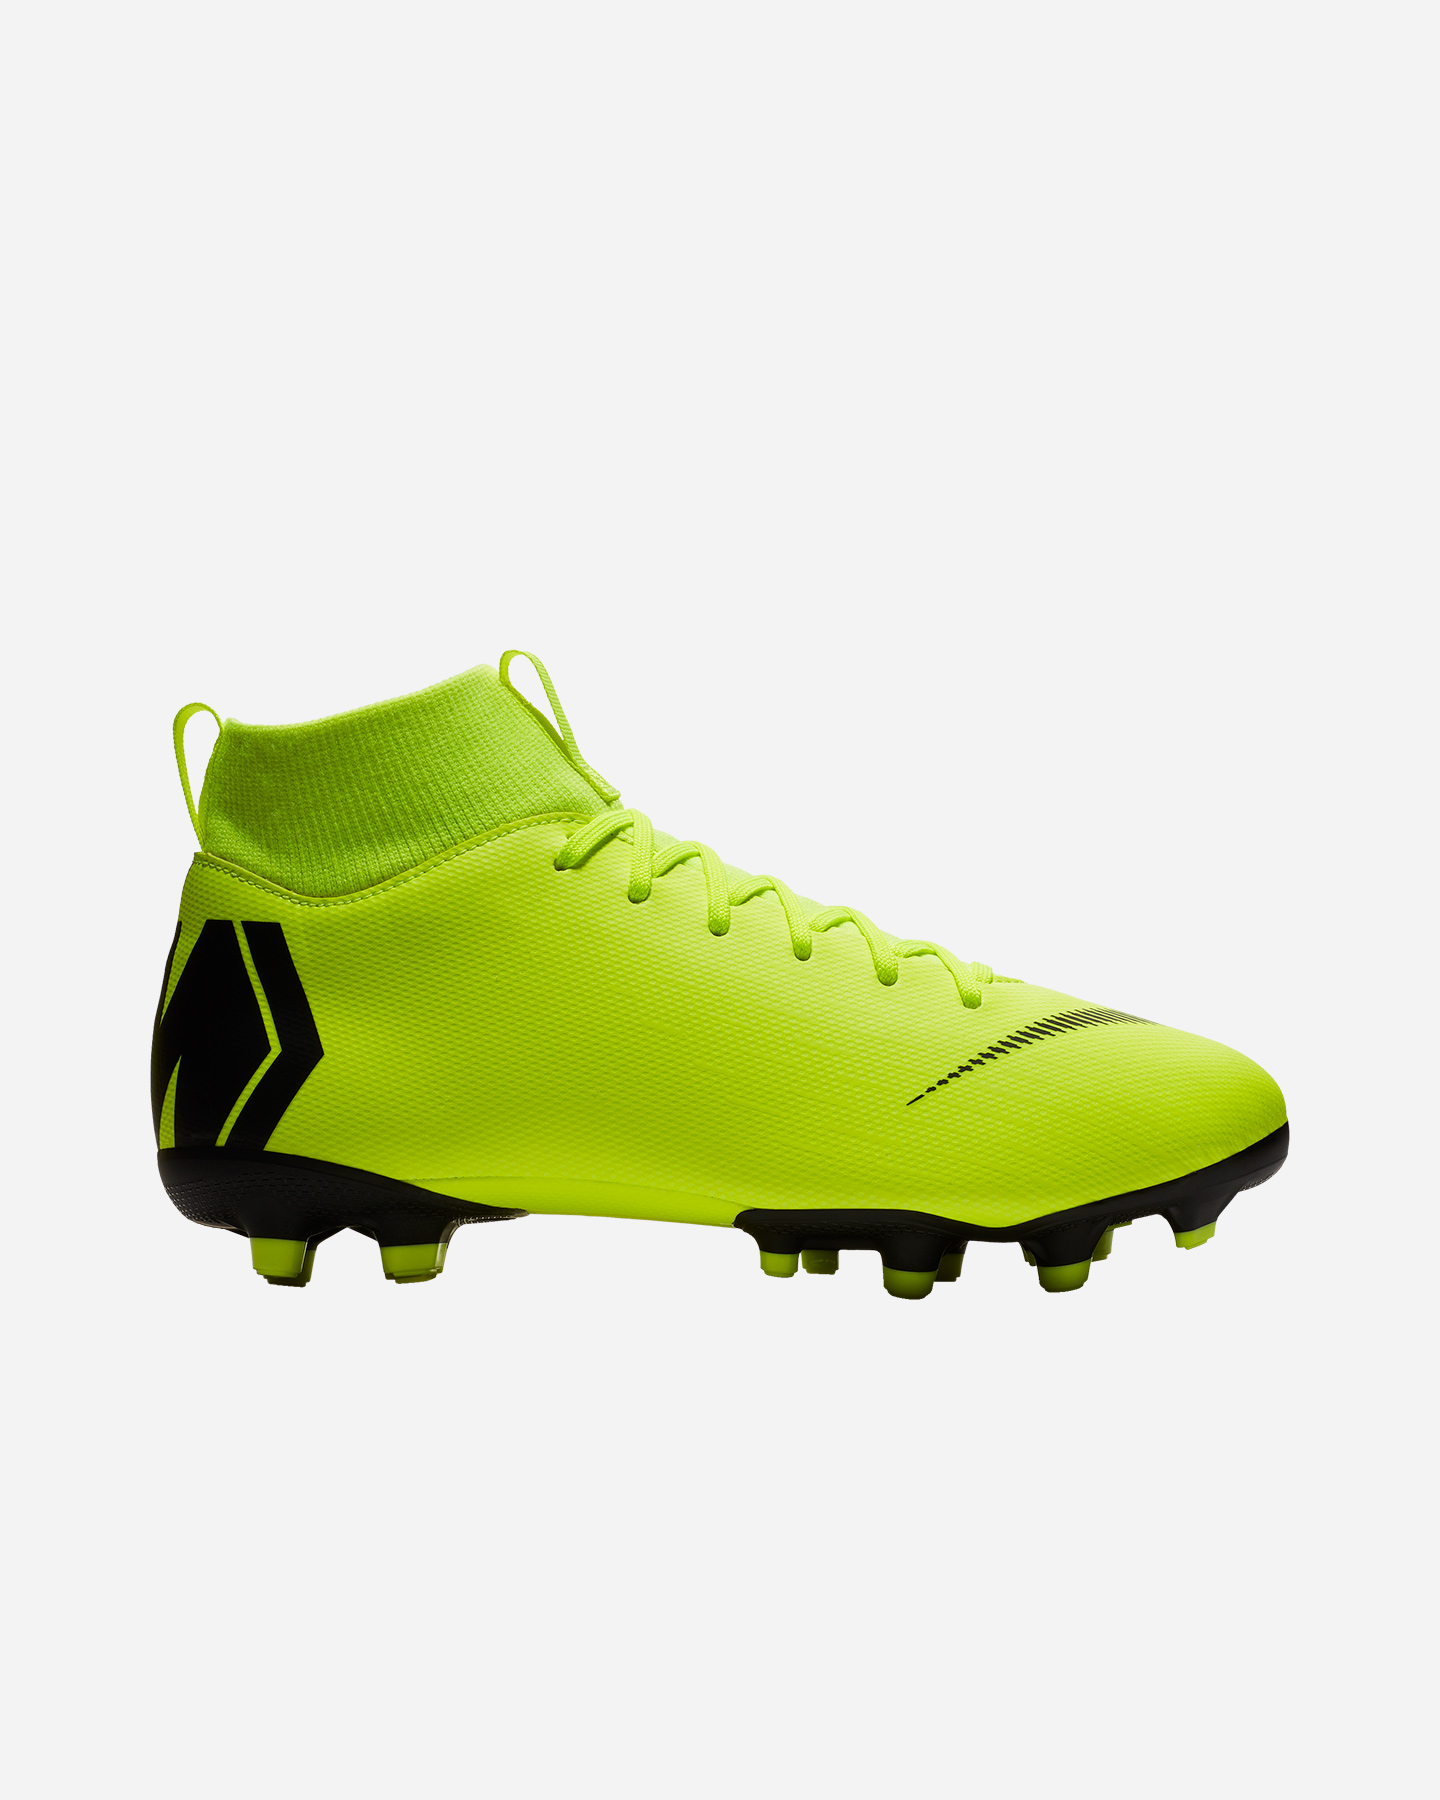 nike mercurial superfly 4 kid sale Up to 75% Discounts